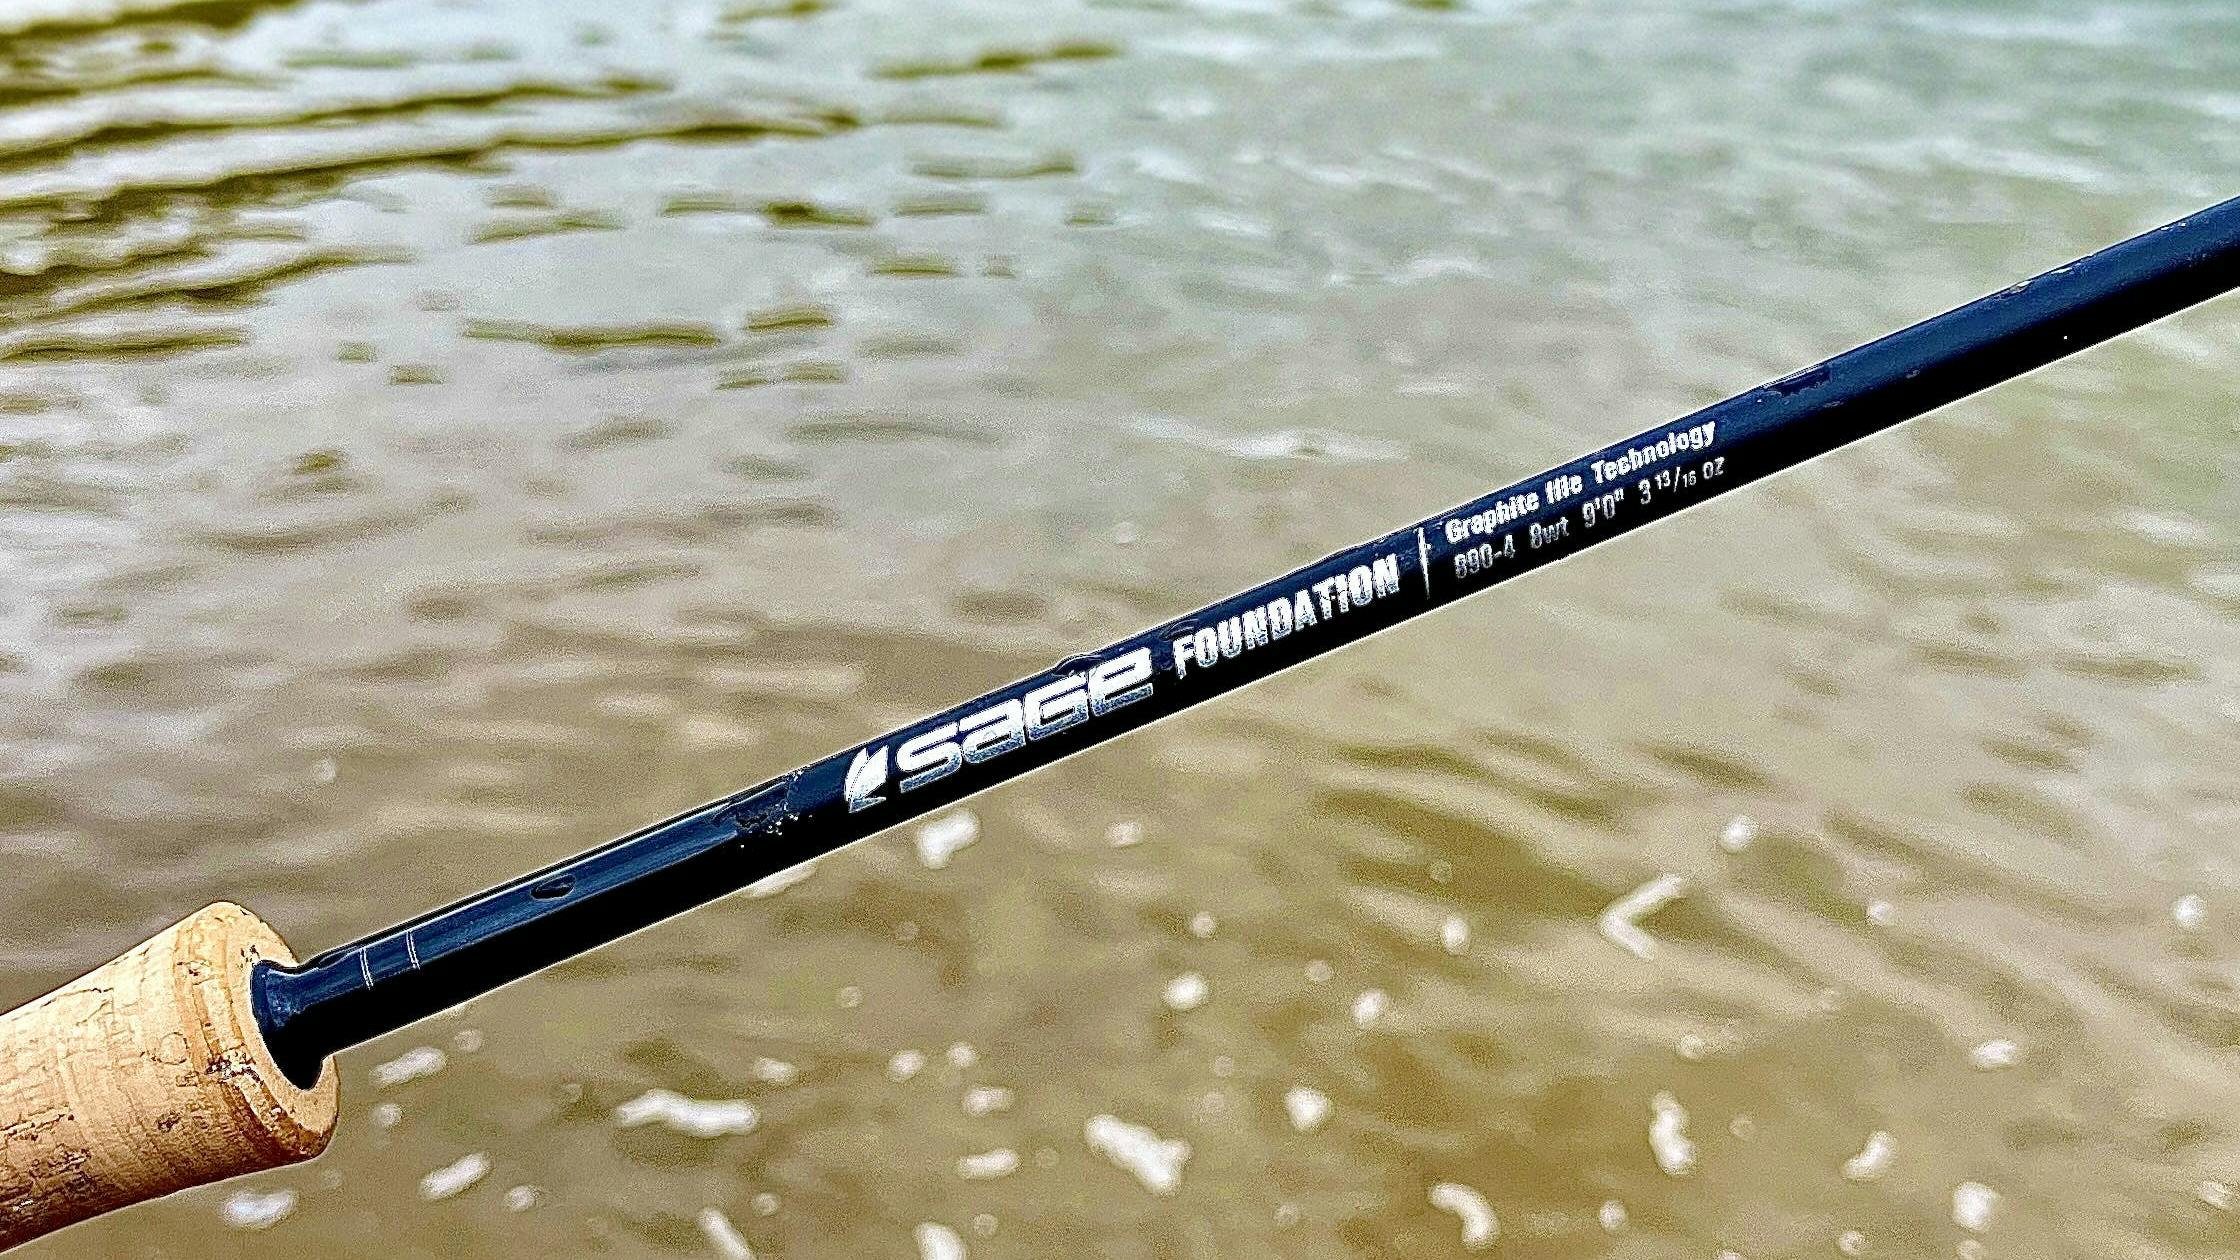 Close up of the Sage Foundation Fly Rod.